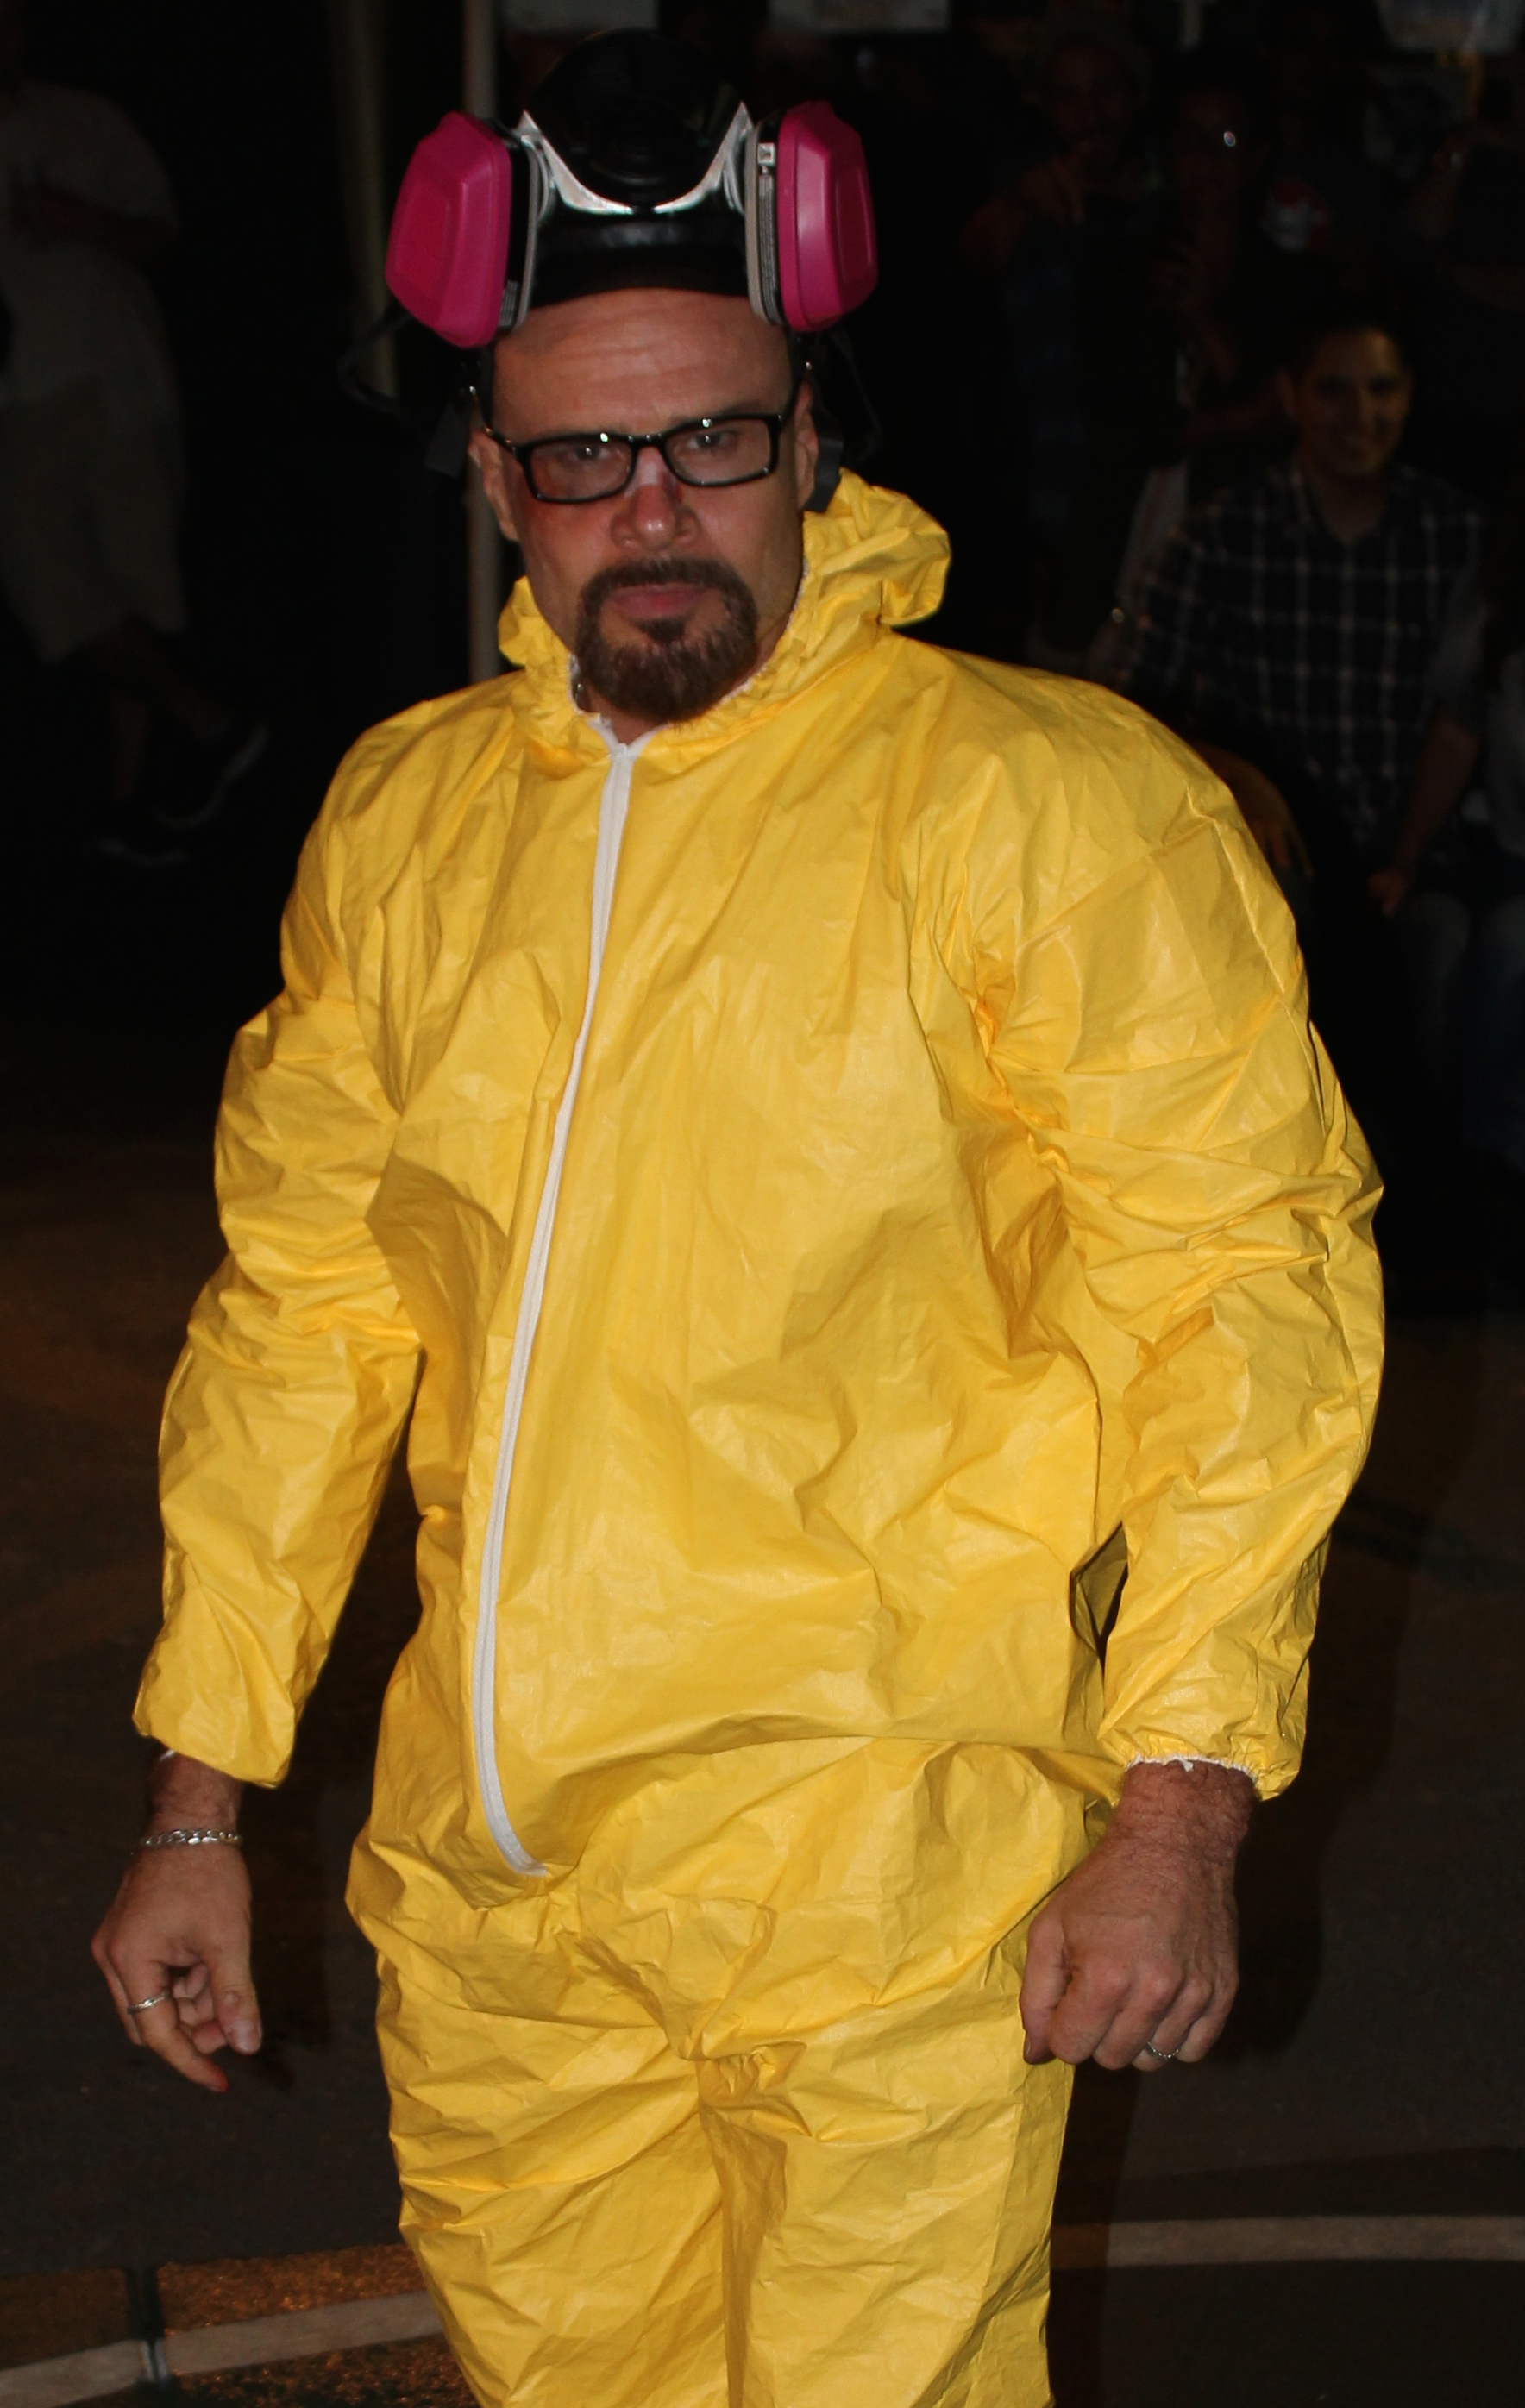 Doing the Breaking Bad Look as Walter White Oct. 2014